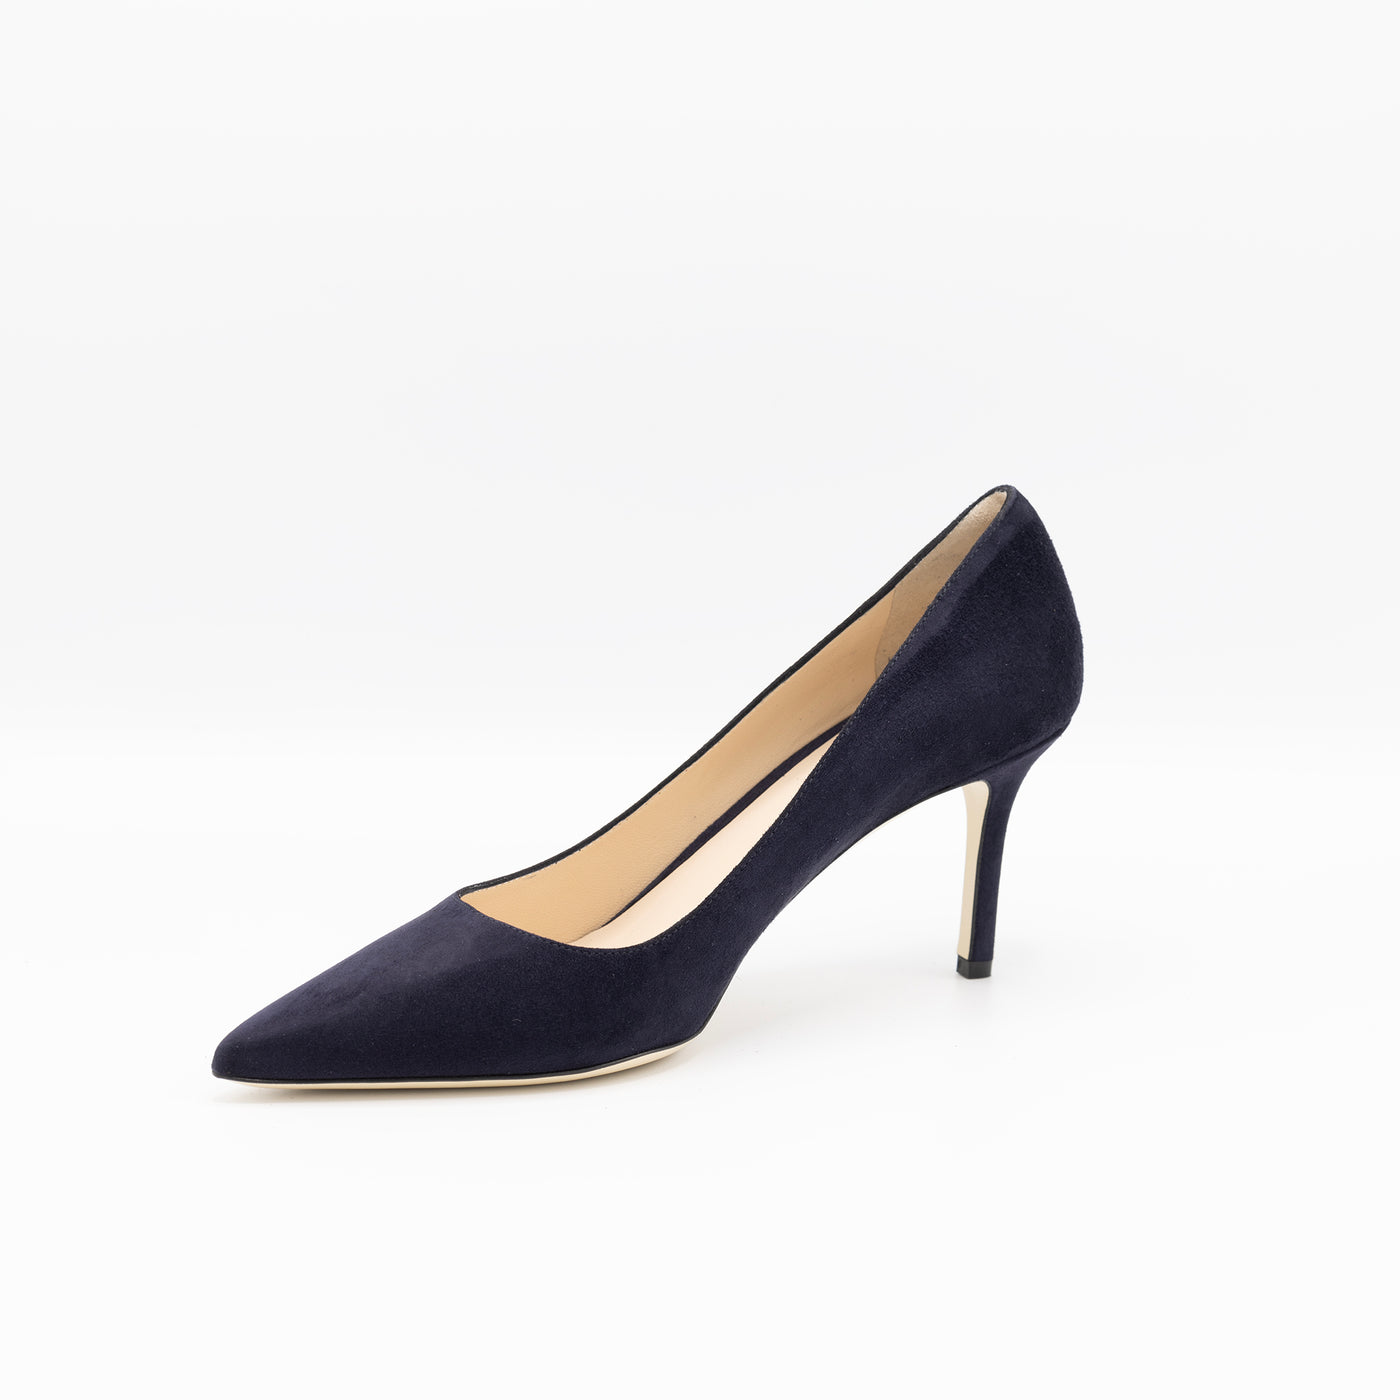 Point toe pumps in navy suede